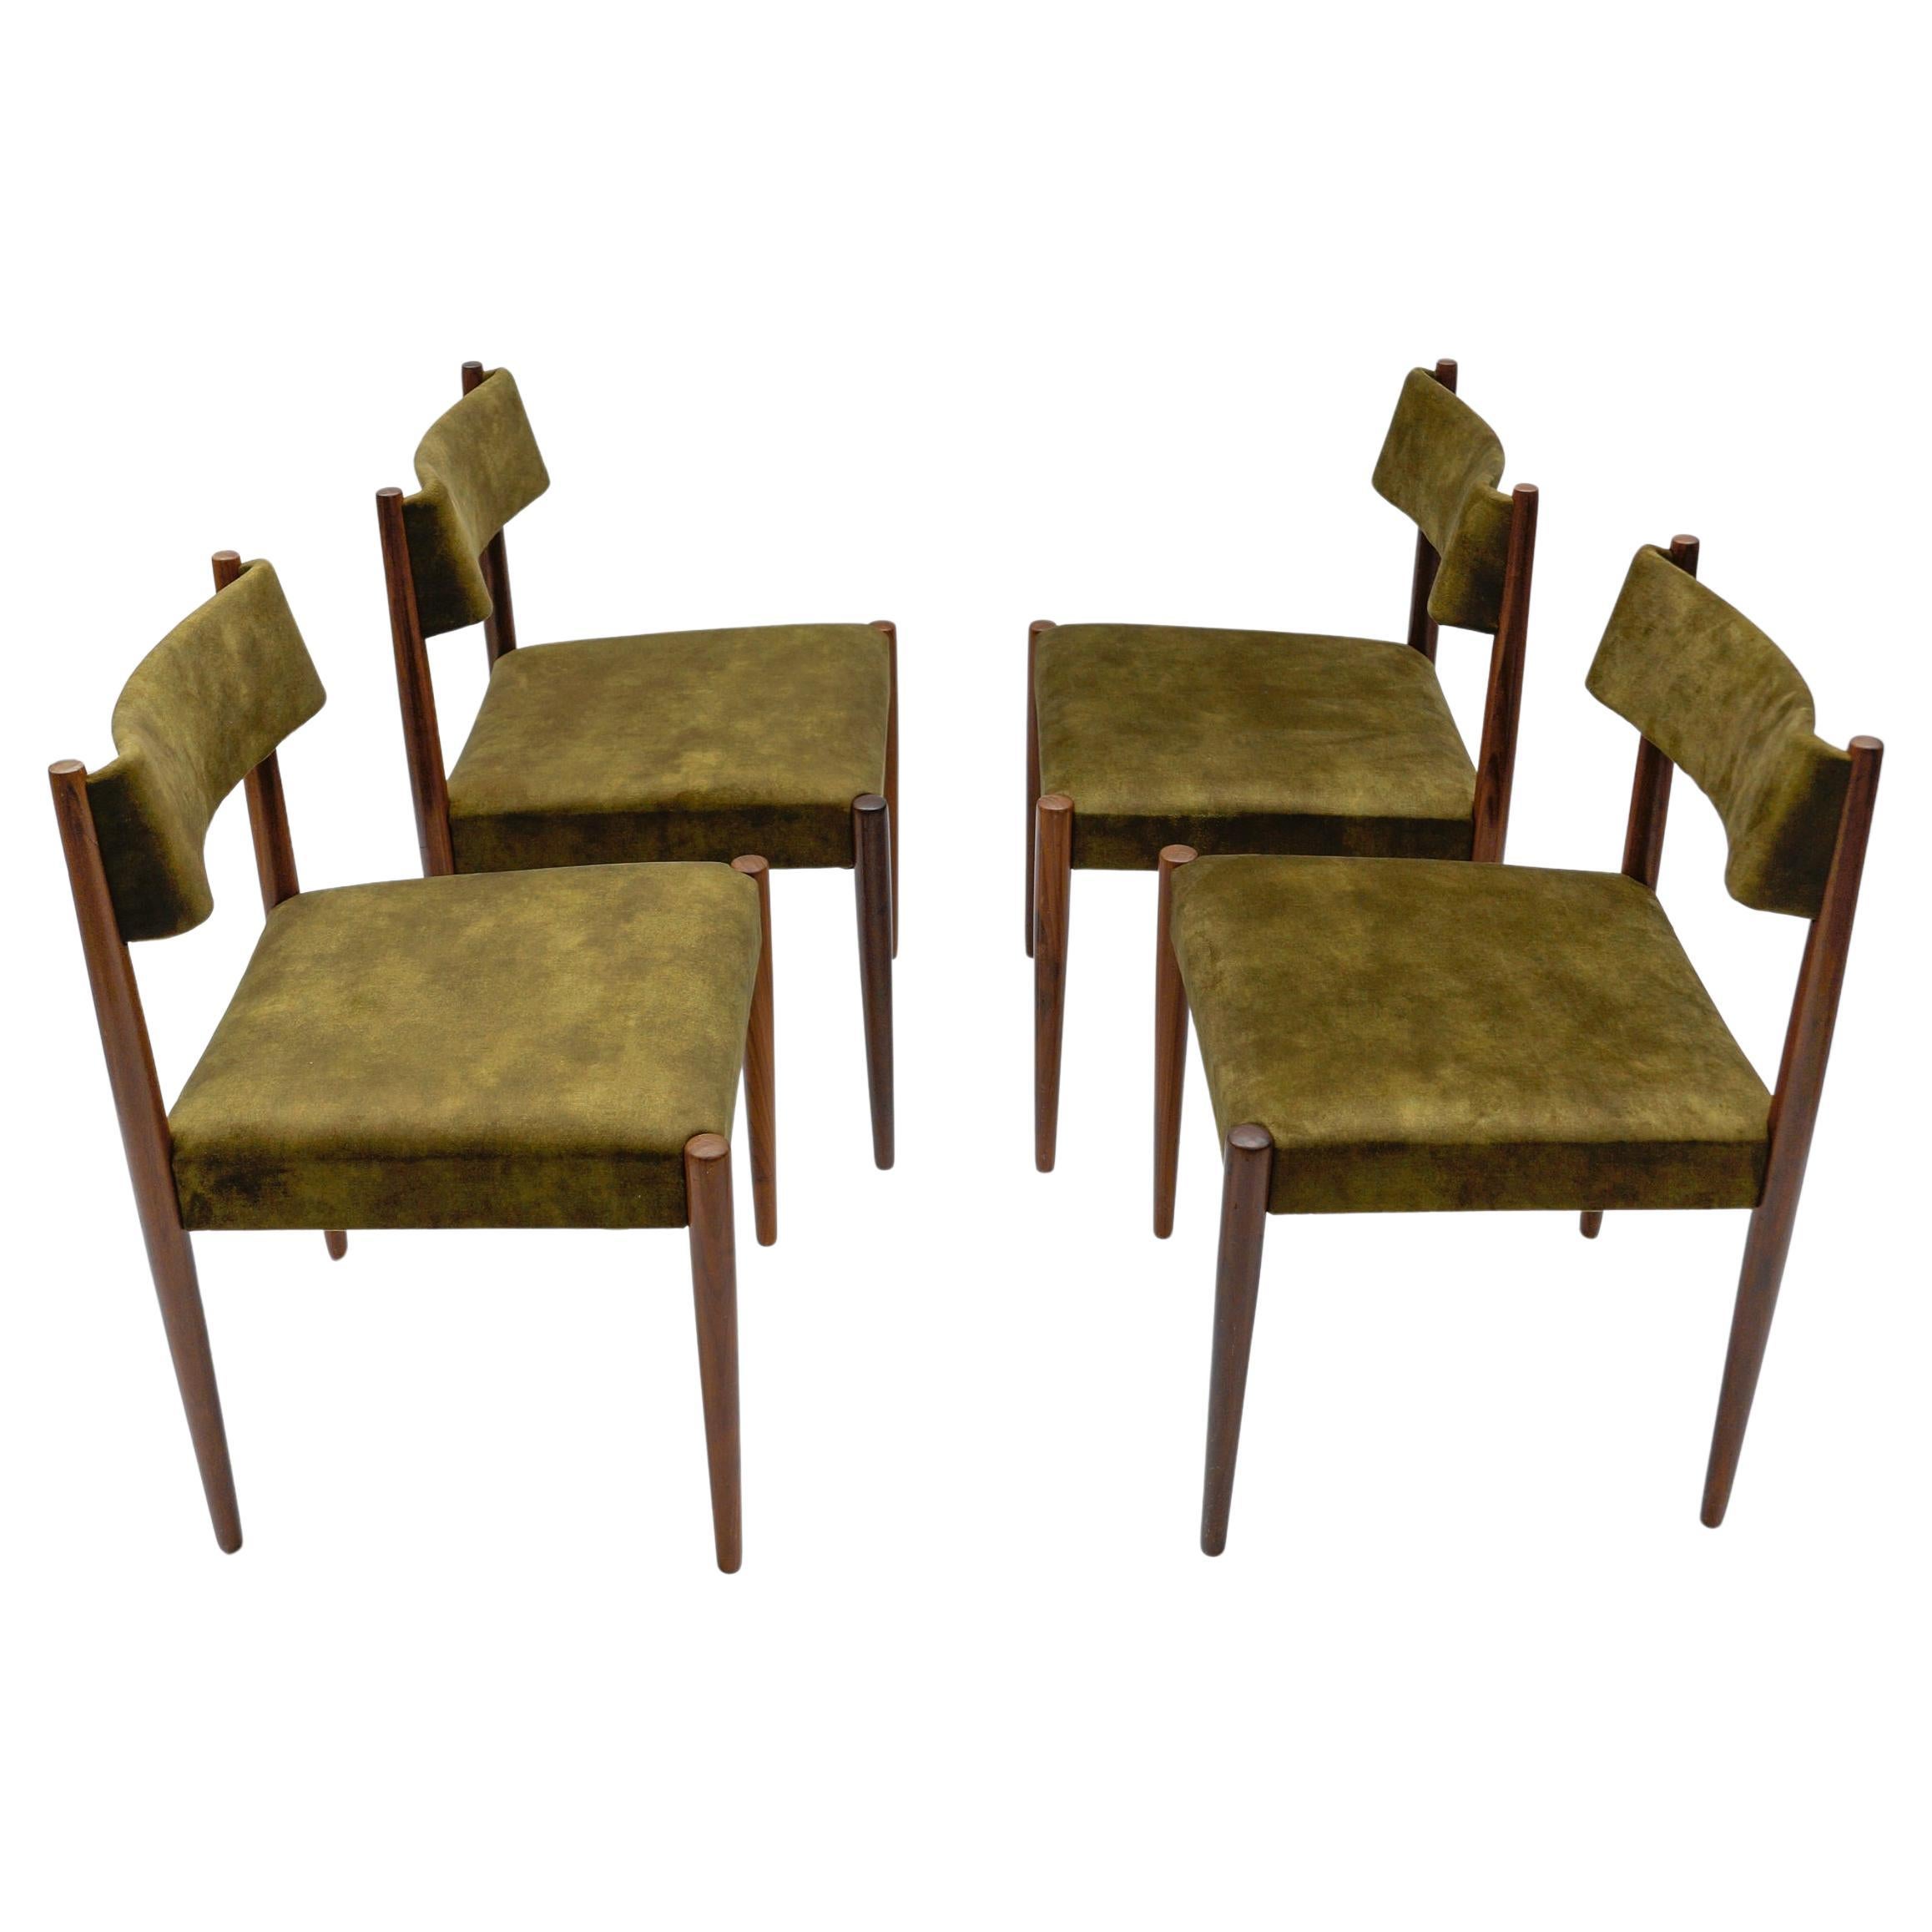 Four Wooden Scandinavian Dining Room Chairs, 1960s